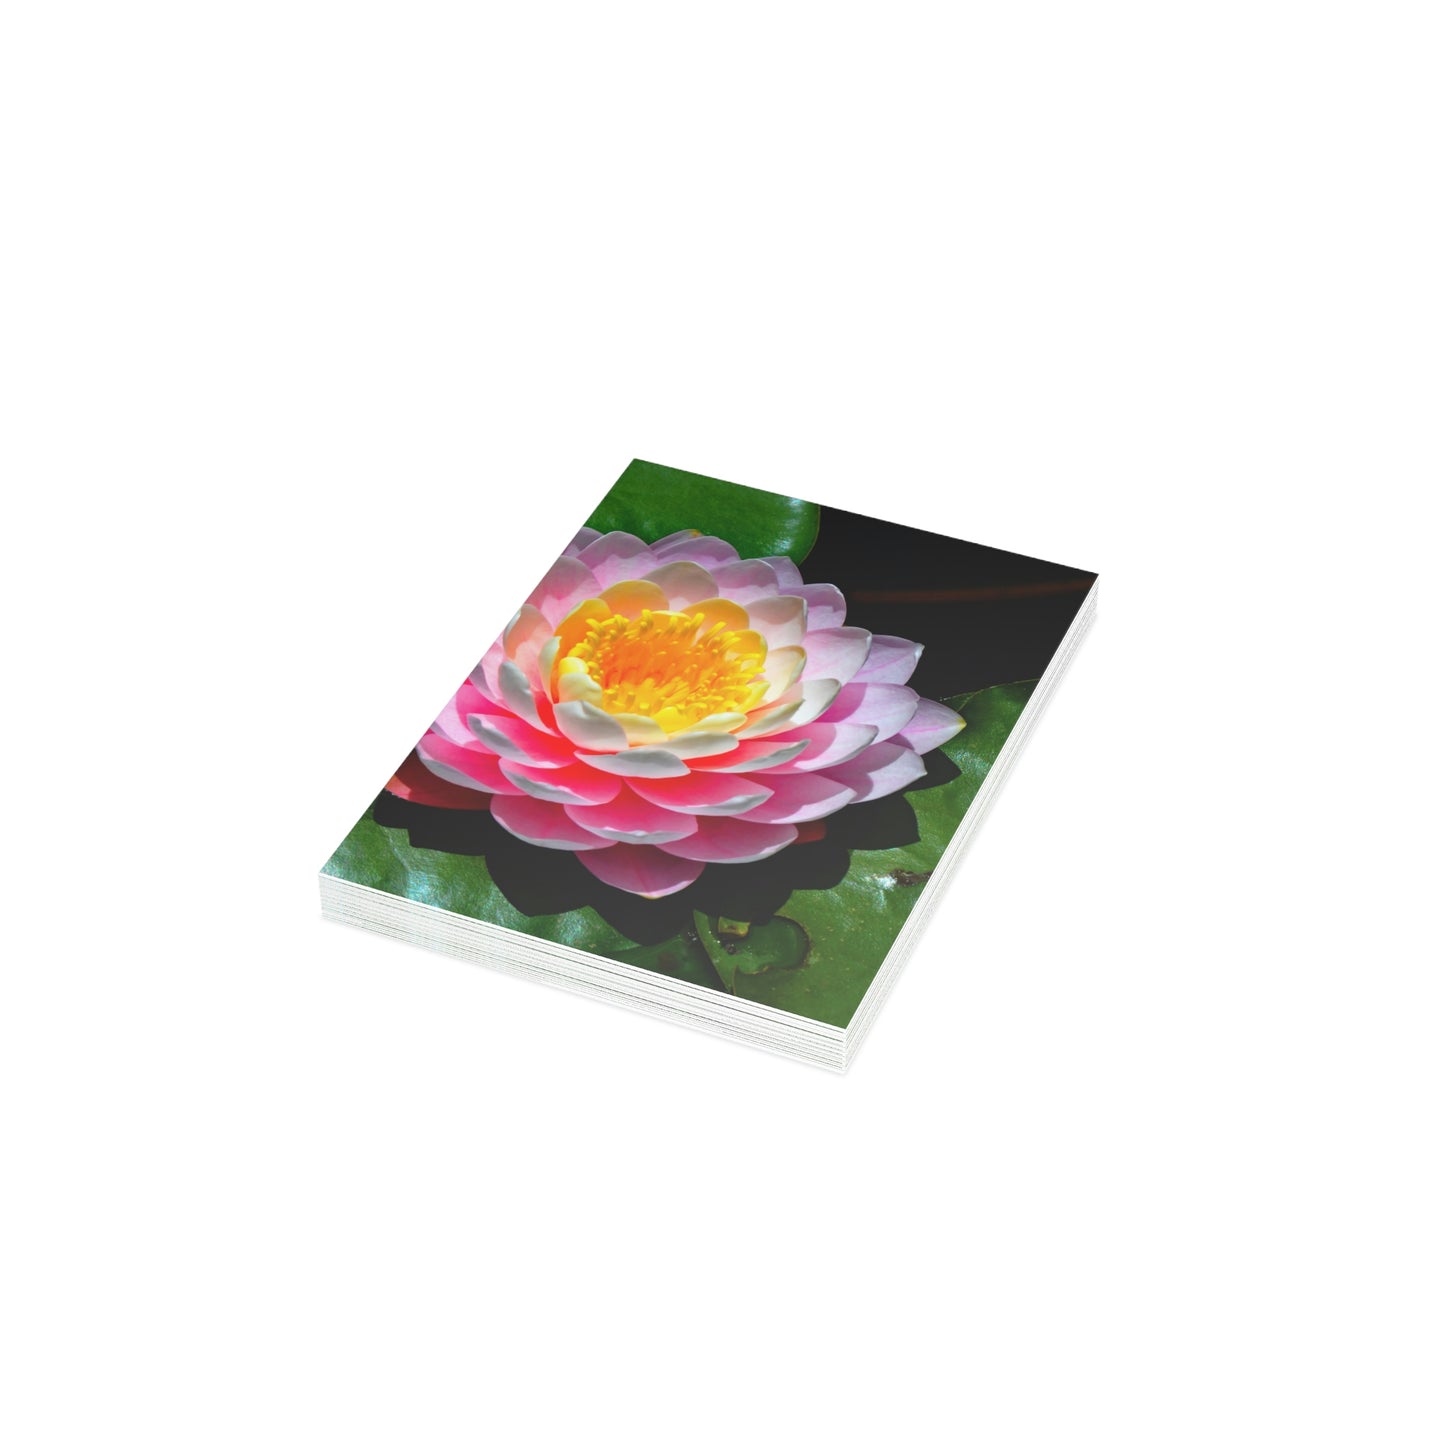 Flowers 25 Greeting Cards (1, 10, 30, and 50pcs)